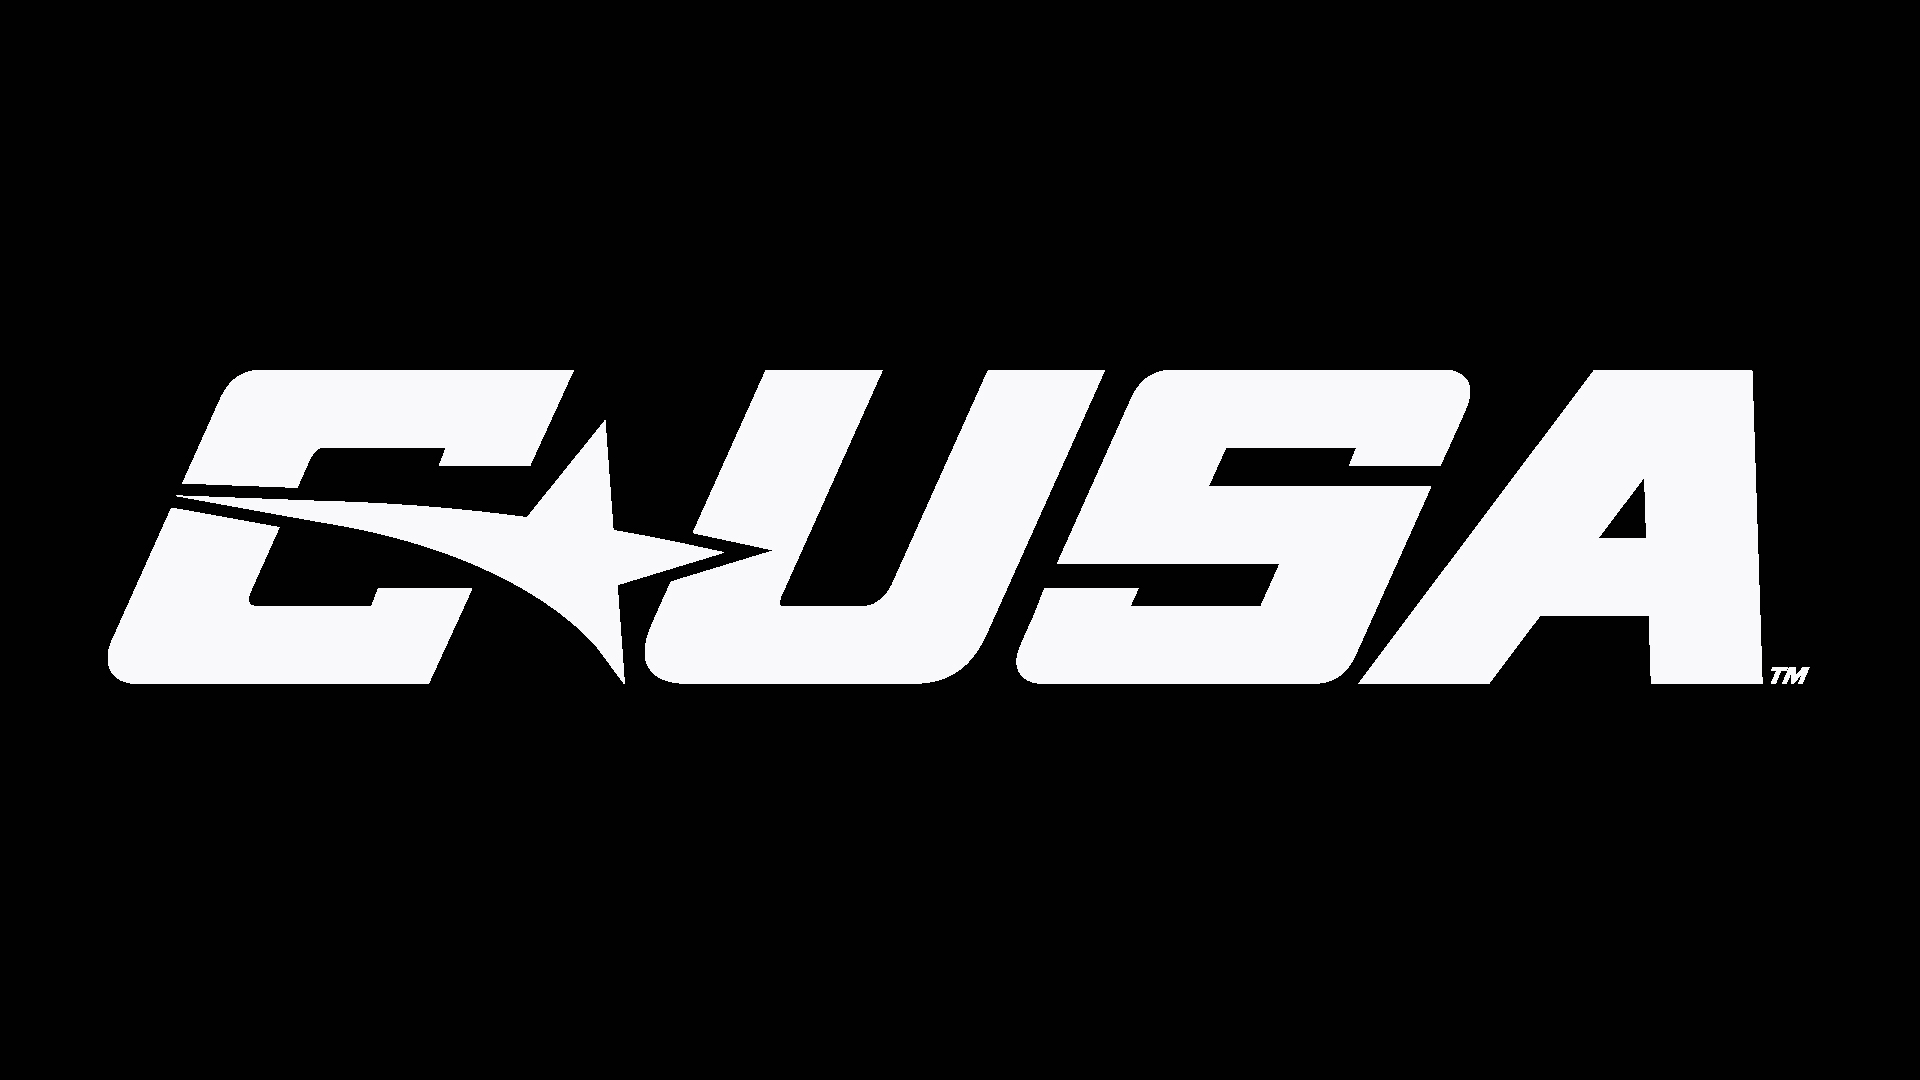 Scheduling Issues With C-USA - ESPN 98.1 FM